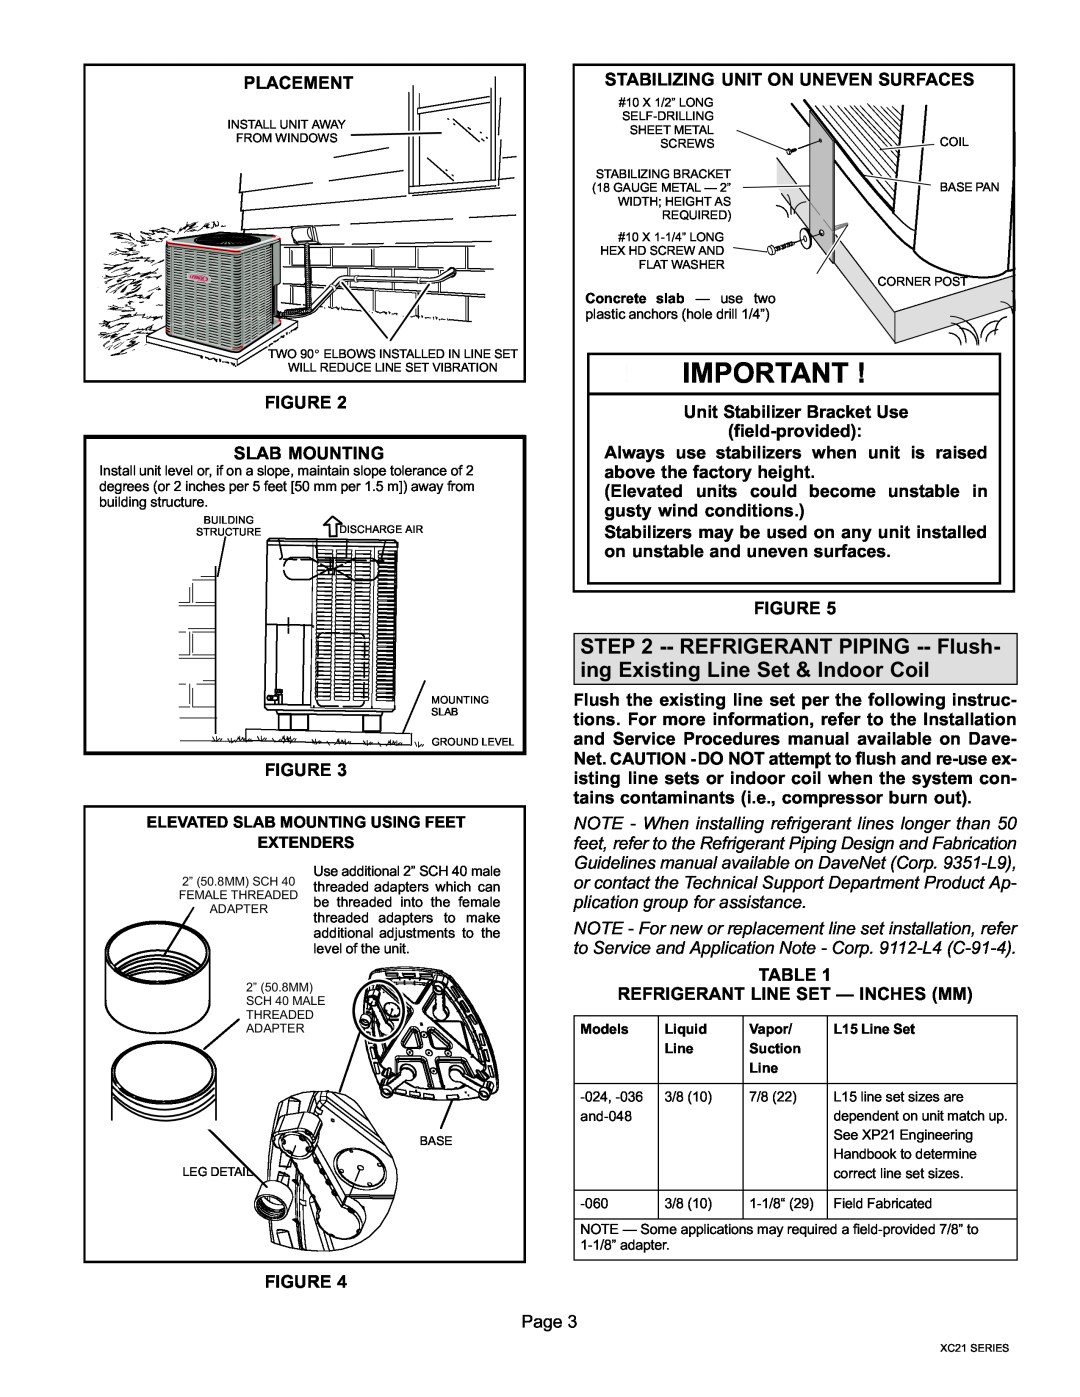 Lennox International Inc Dave Lennox Signature Collection XC21 System installation instructions Placement 